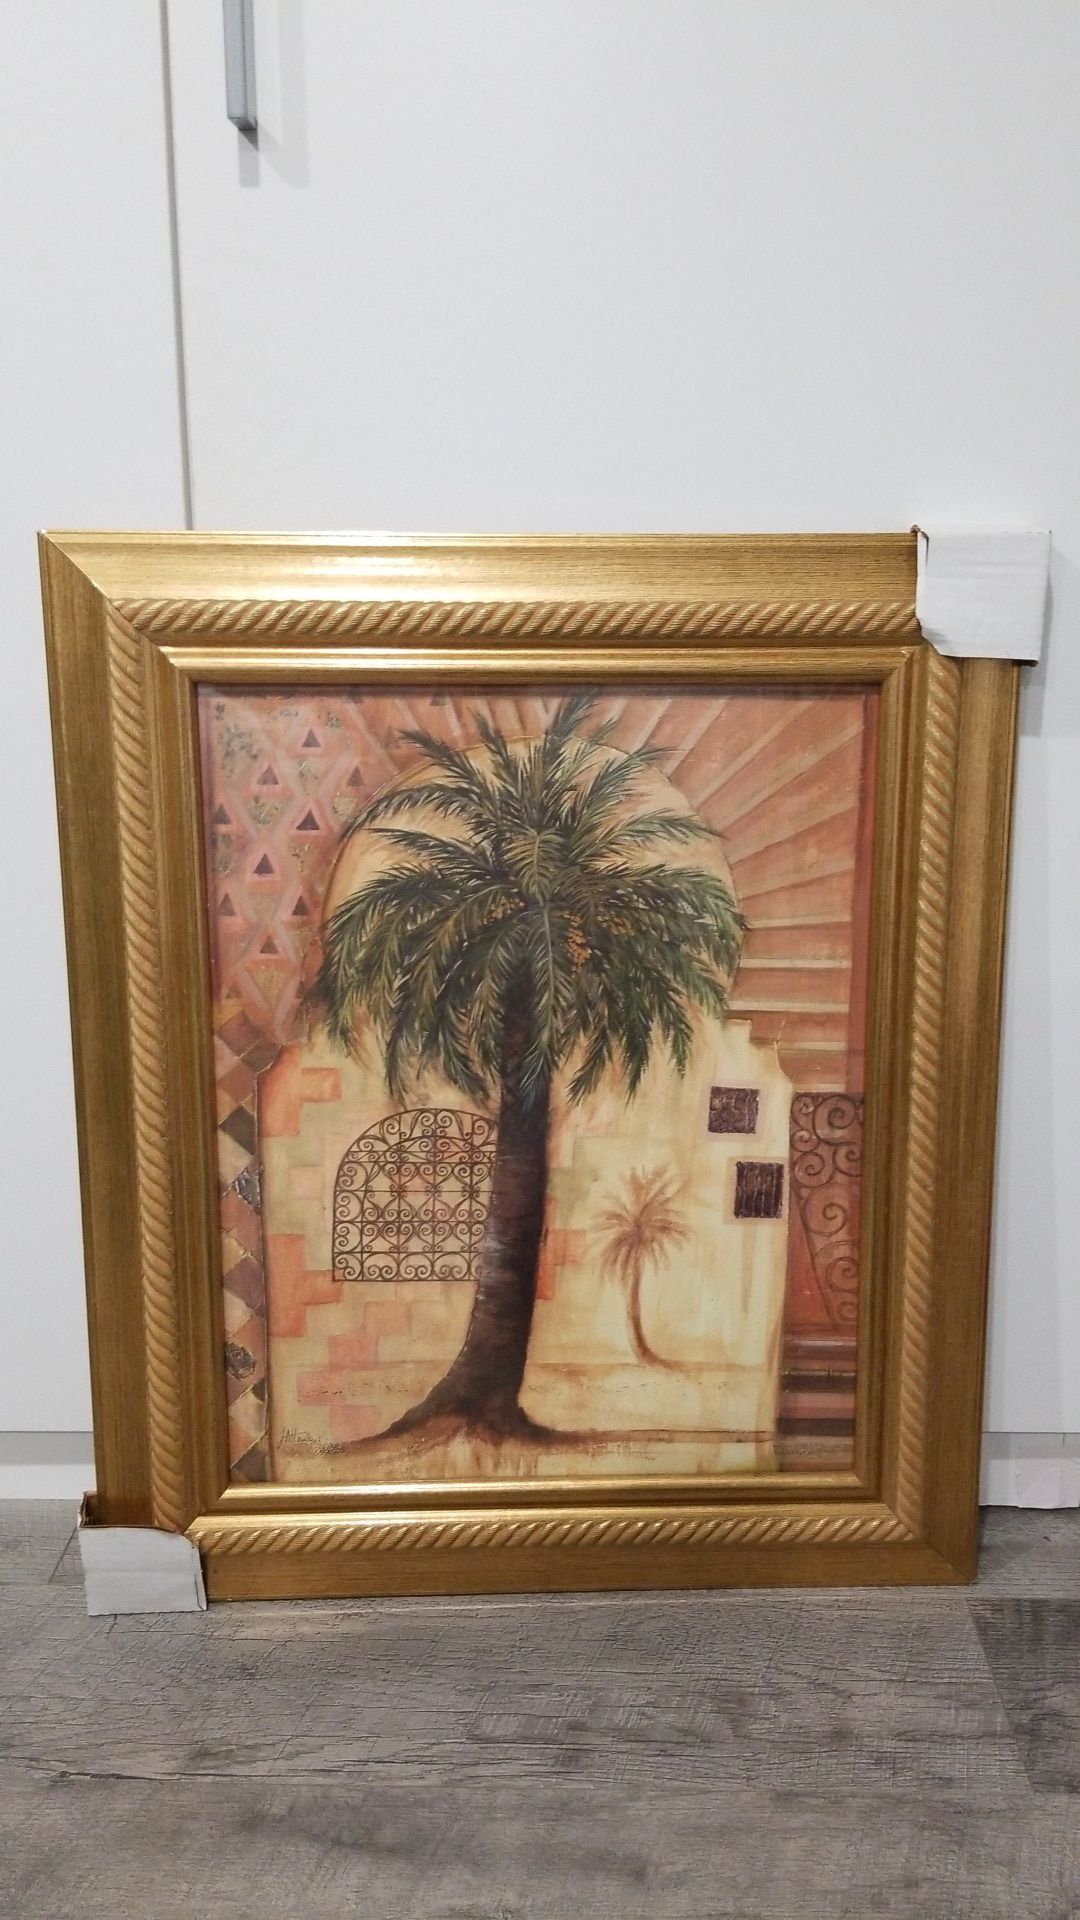 New, large gold picture frame